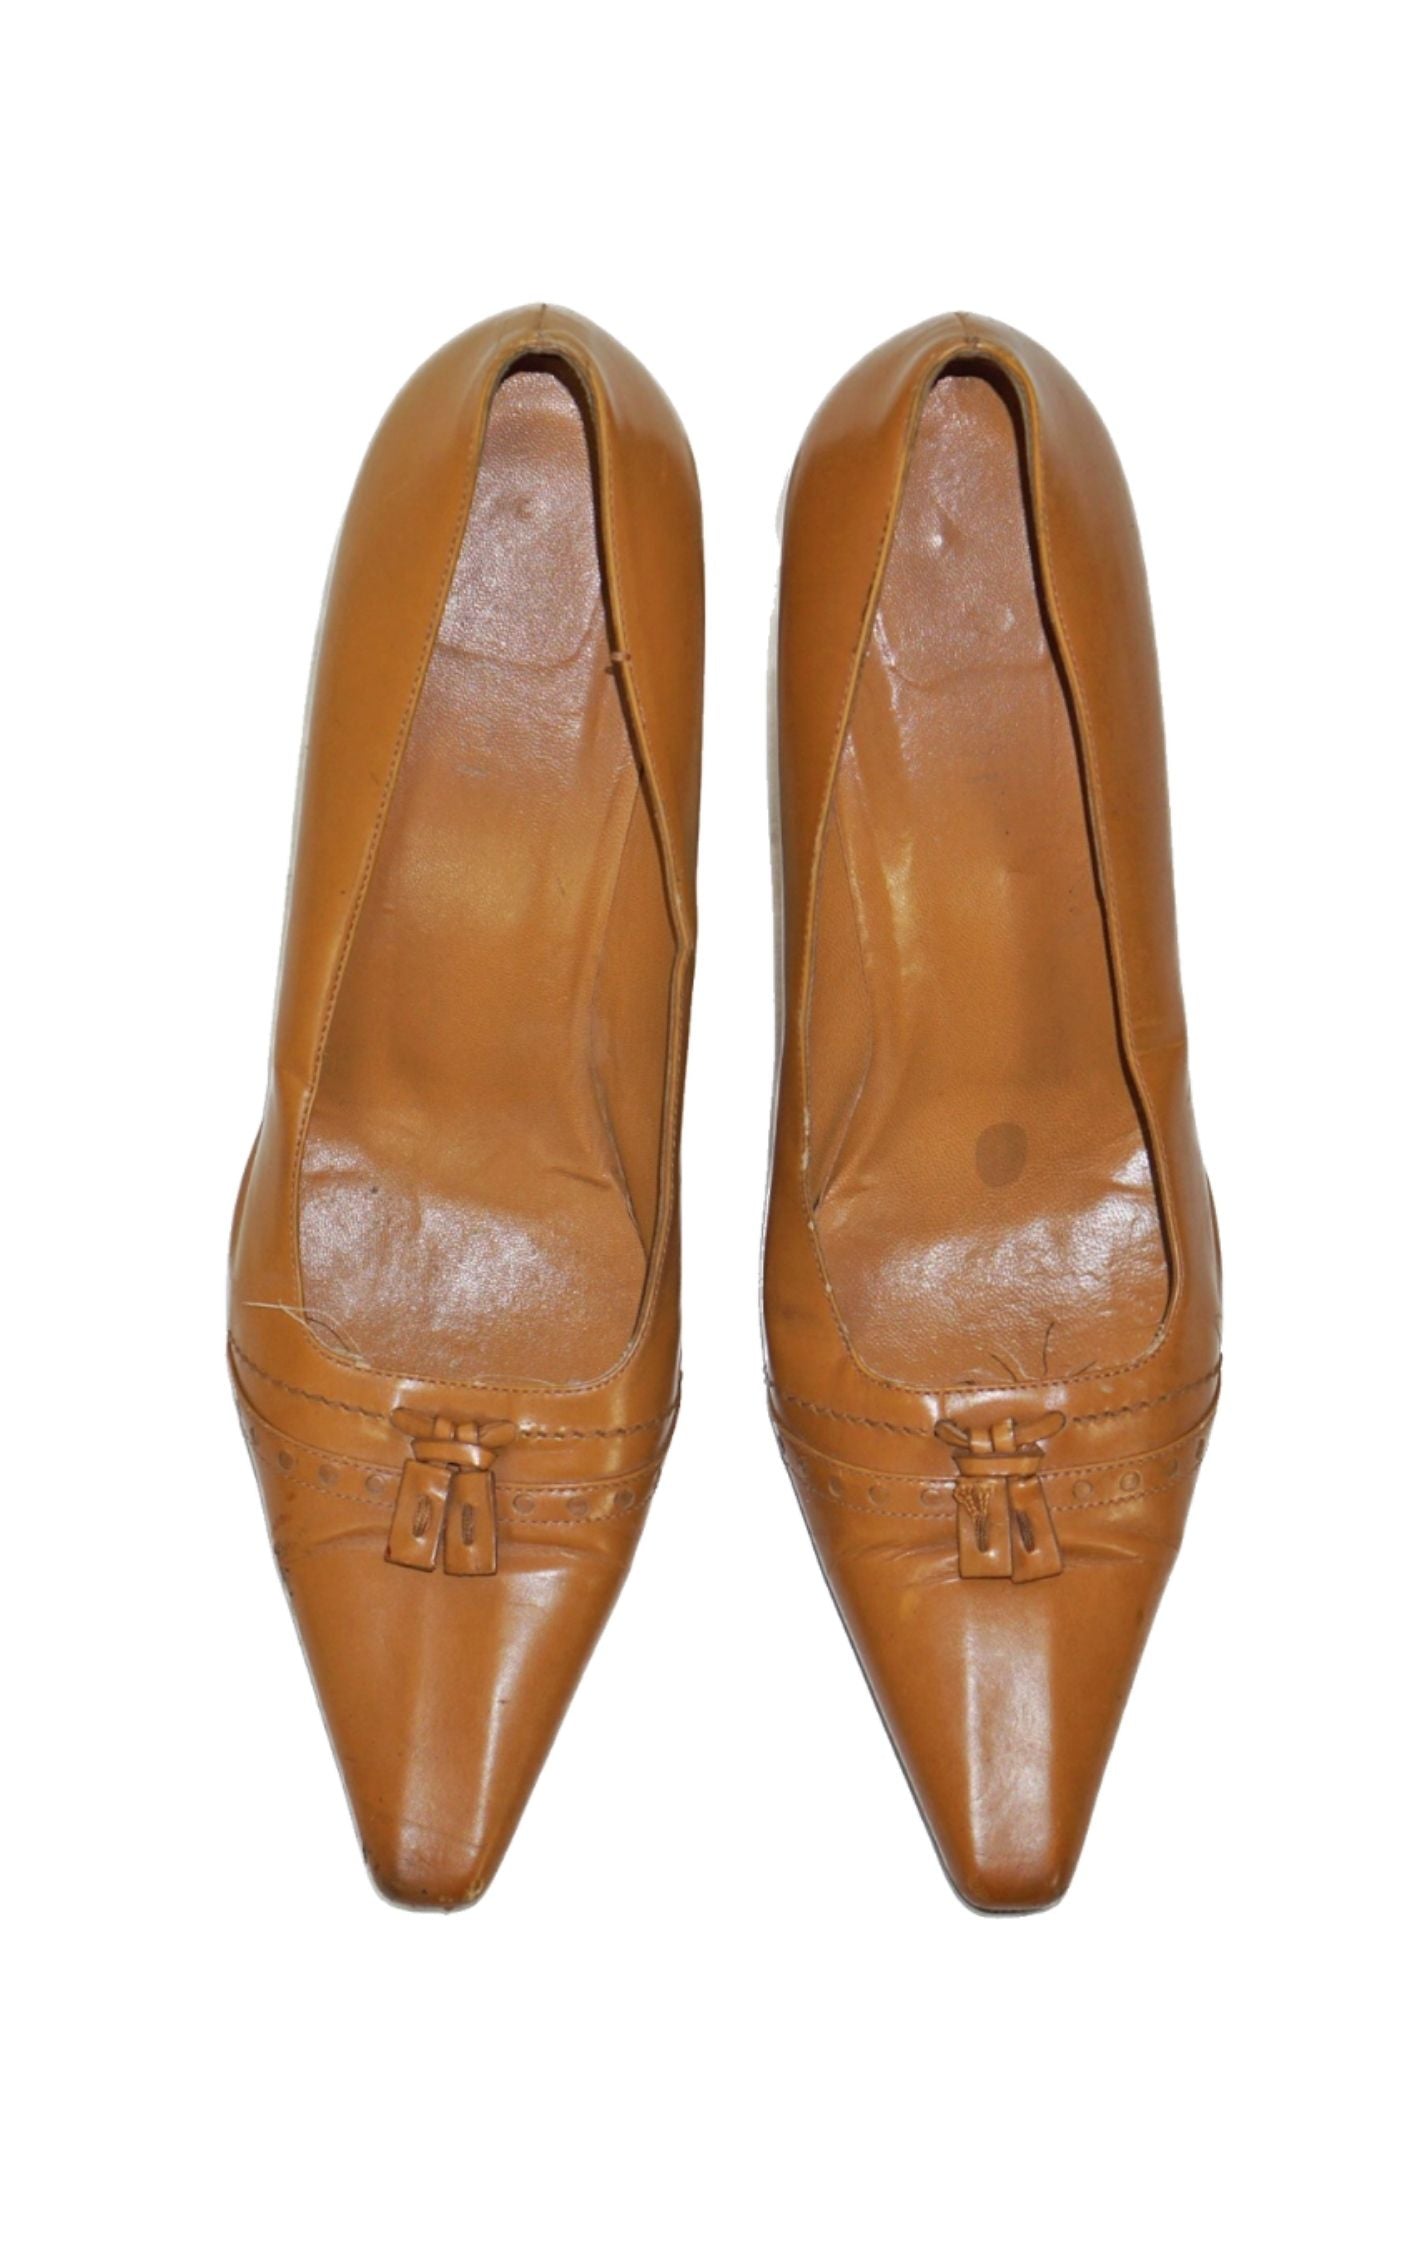 GUCCI Vintage Brown Leather Pointed Toe Pumps RESELLUM